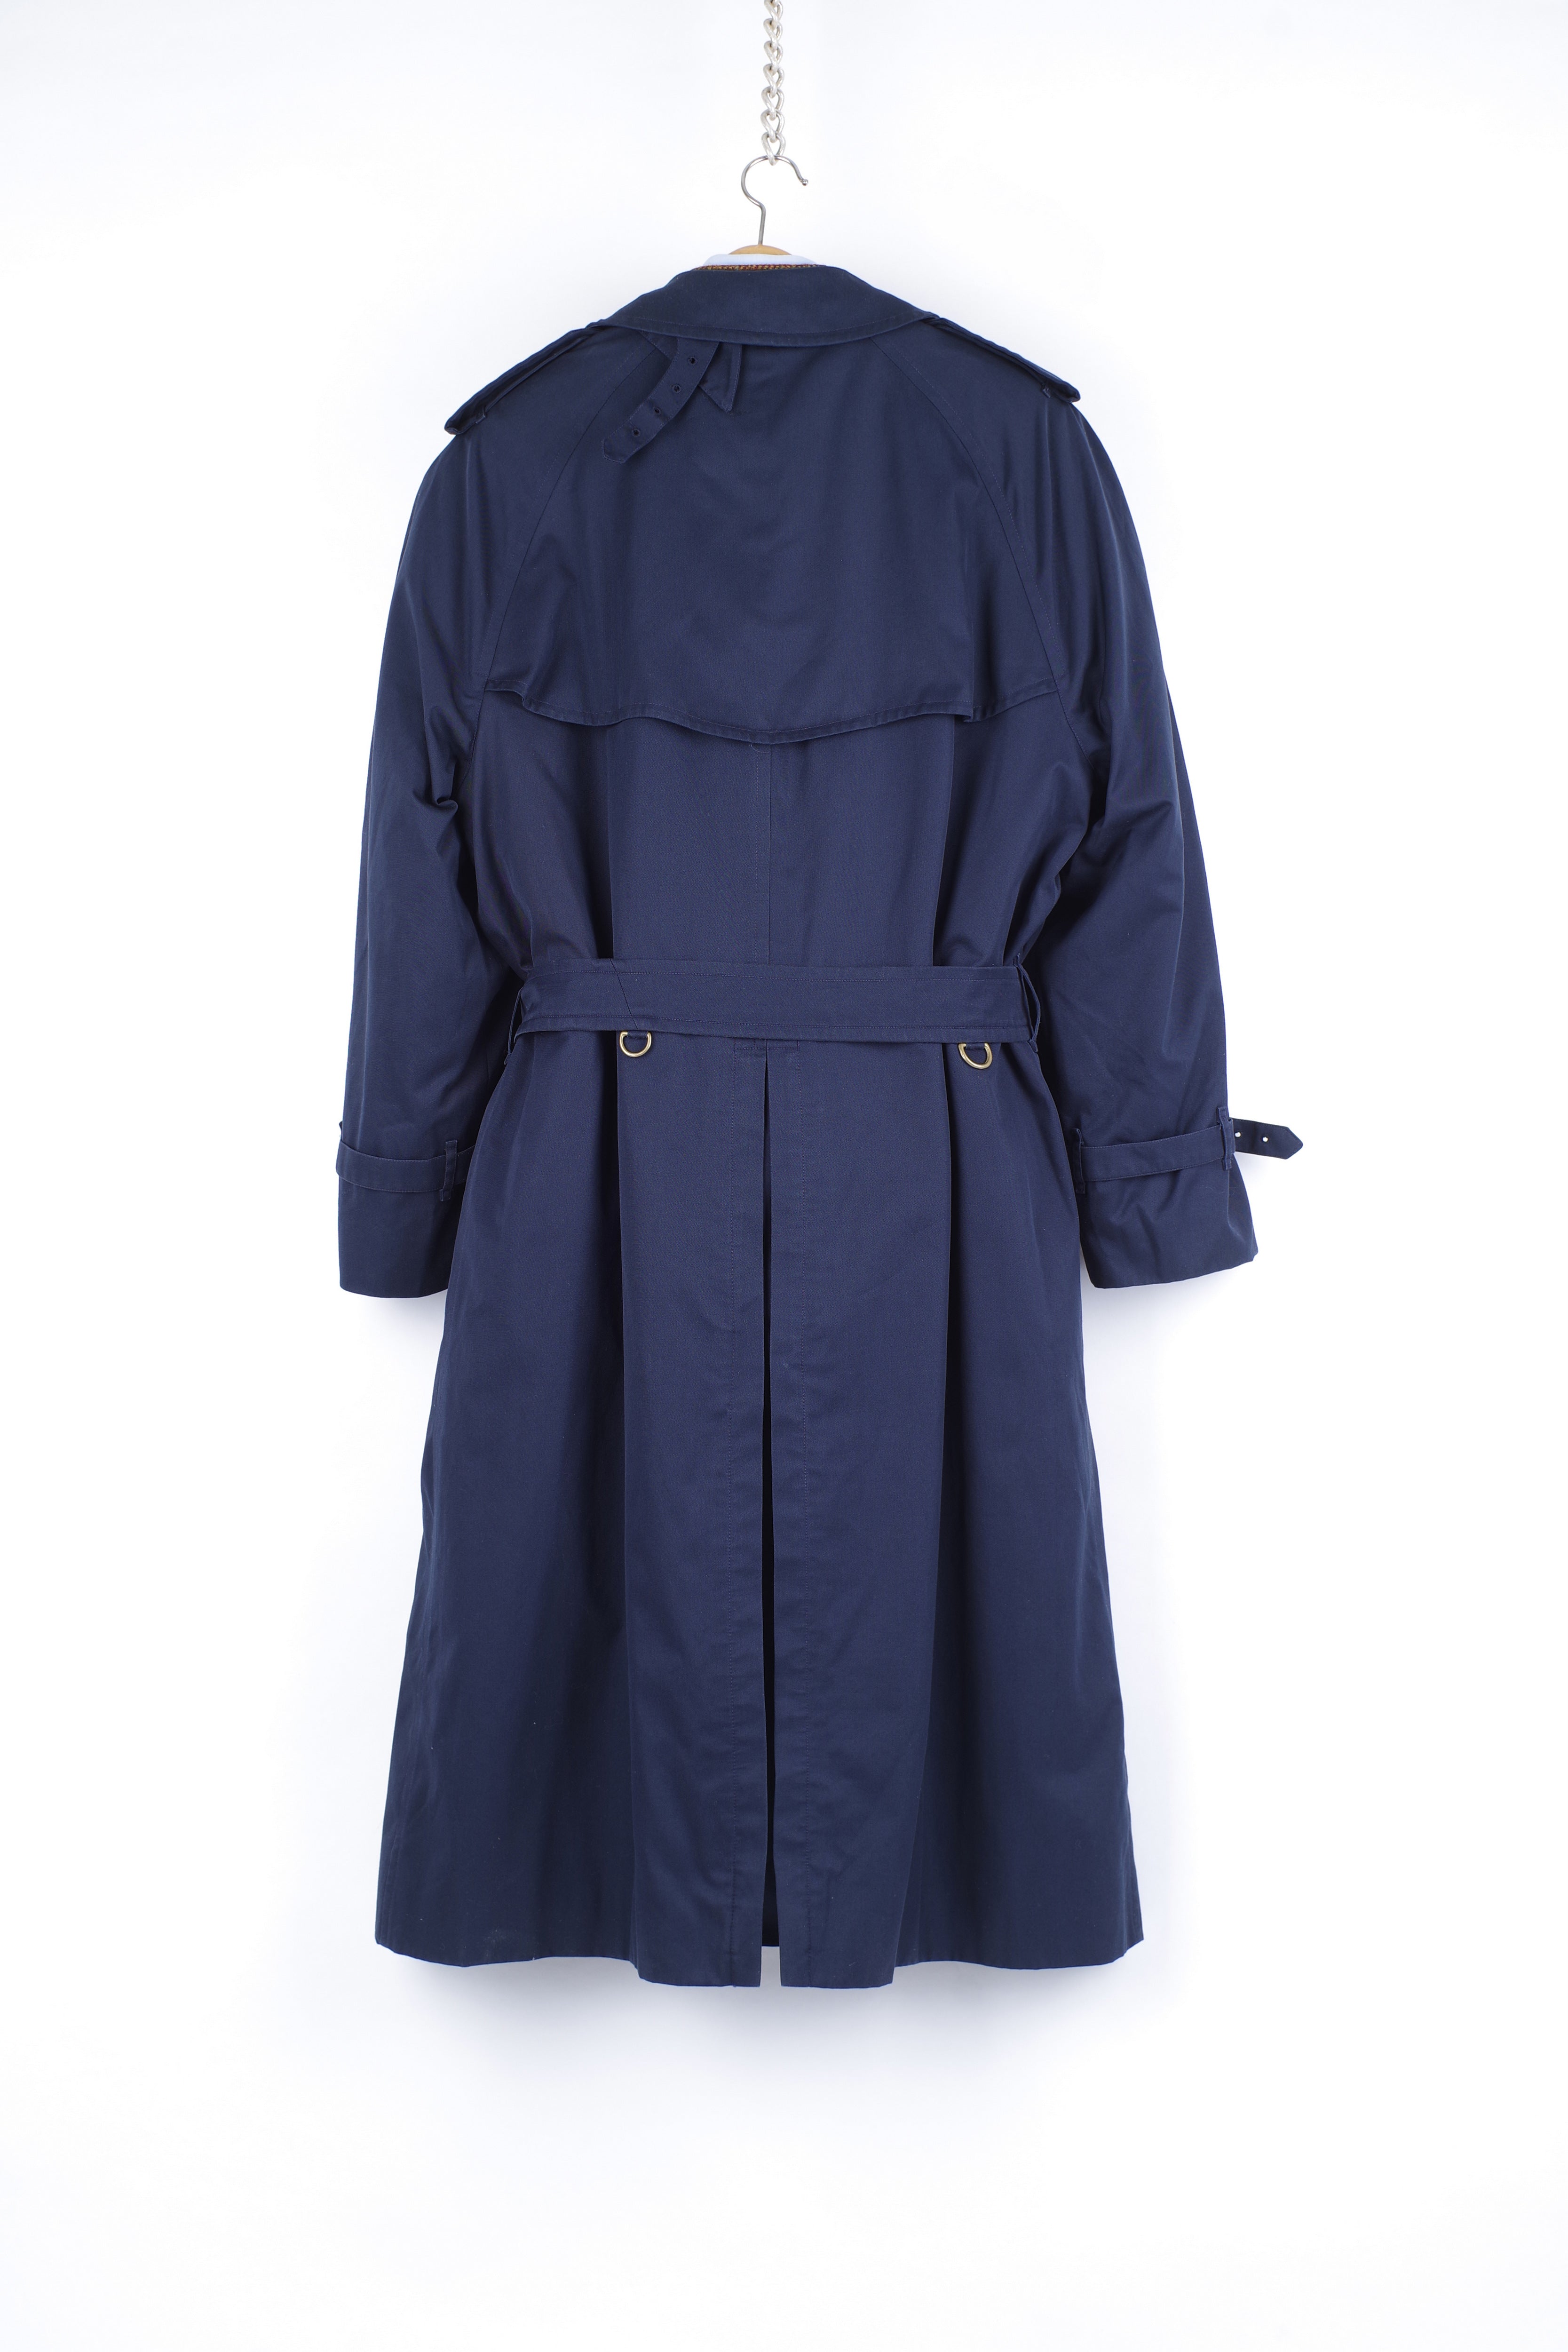 Burberry Vintage Navy Blue Trench Coat, Size REG 60, US 50R